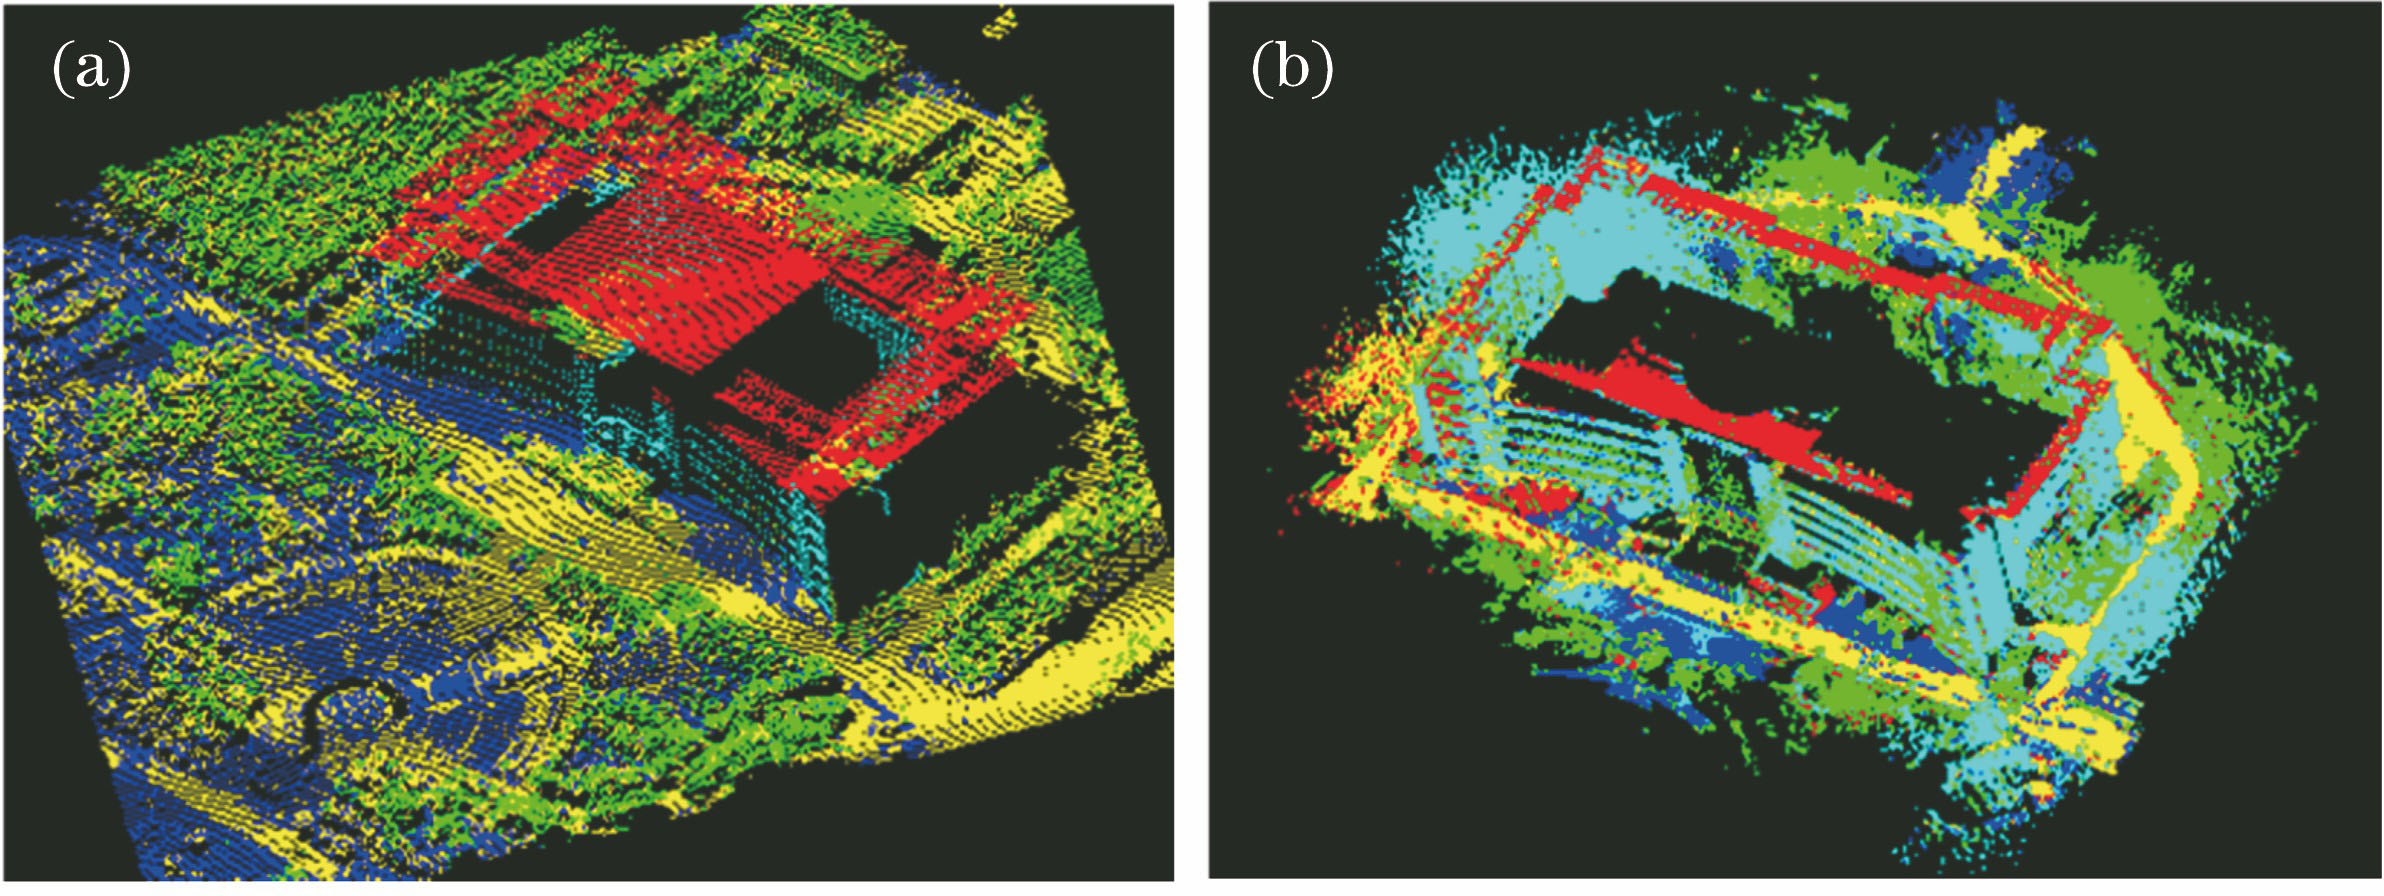 Intensity classification images of (a) airborne and (b) terrestrial LiDAR